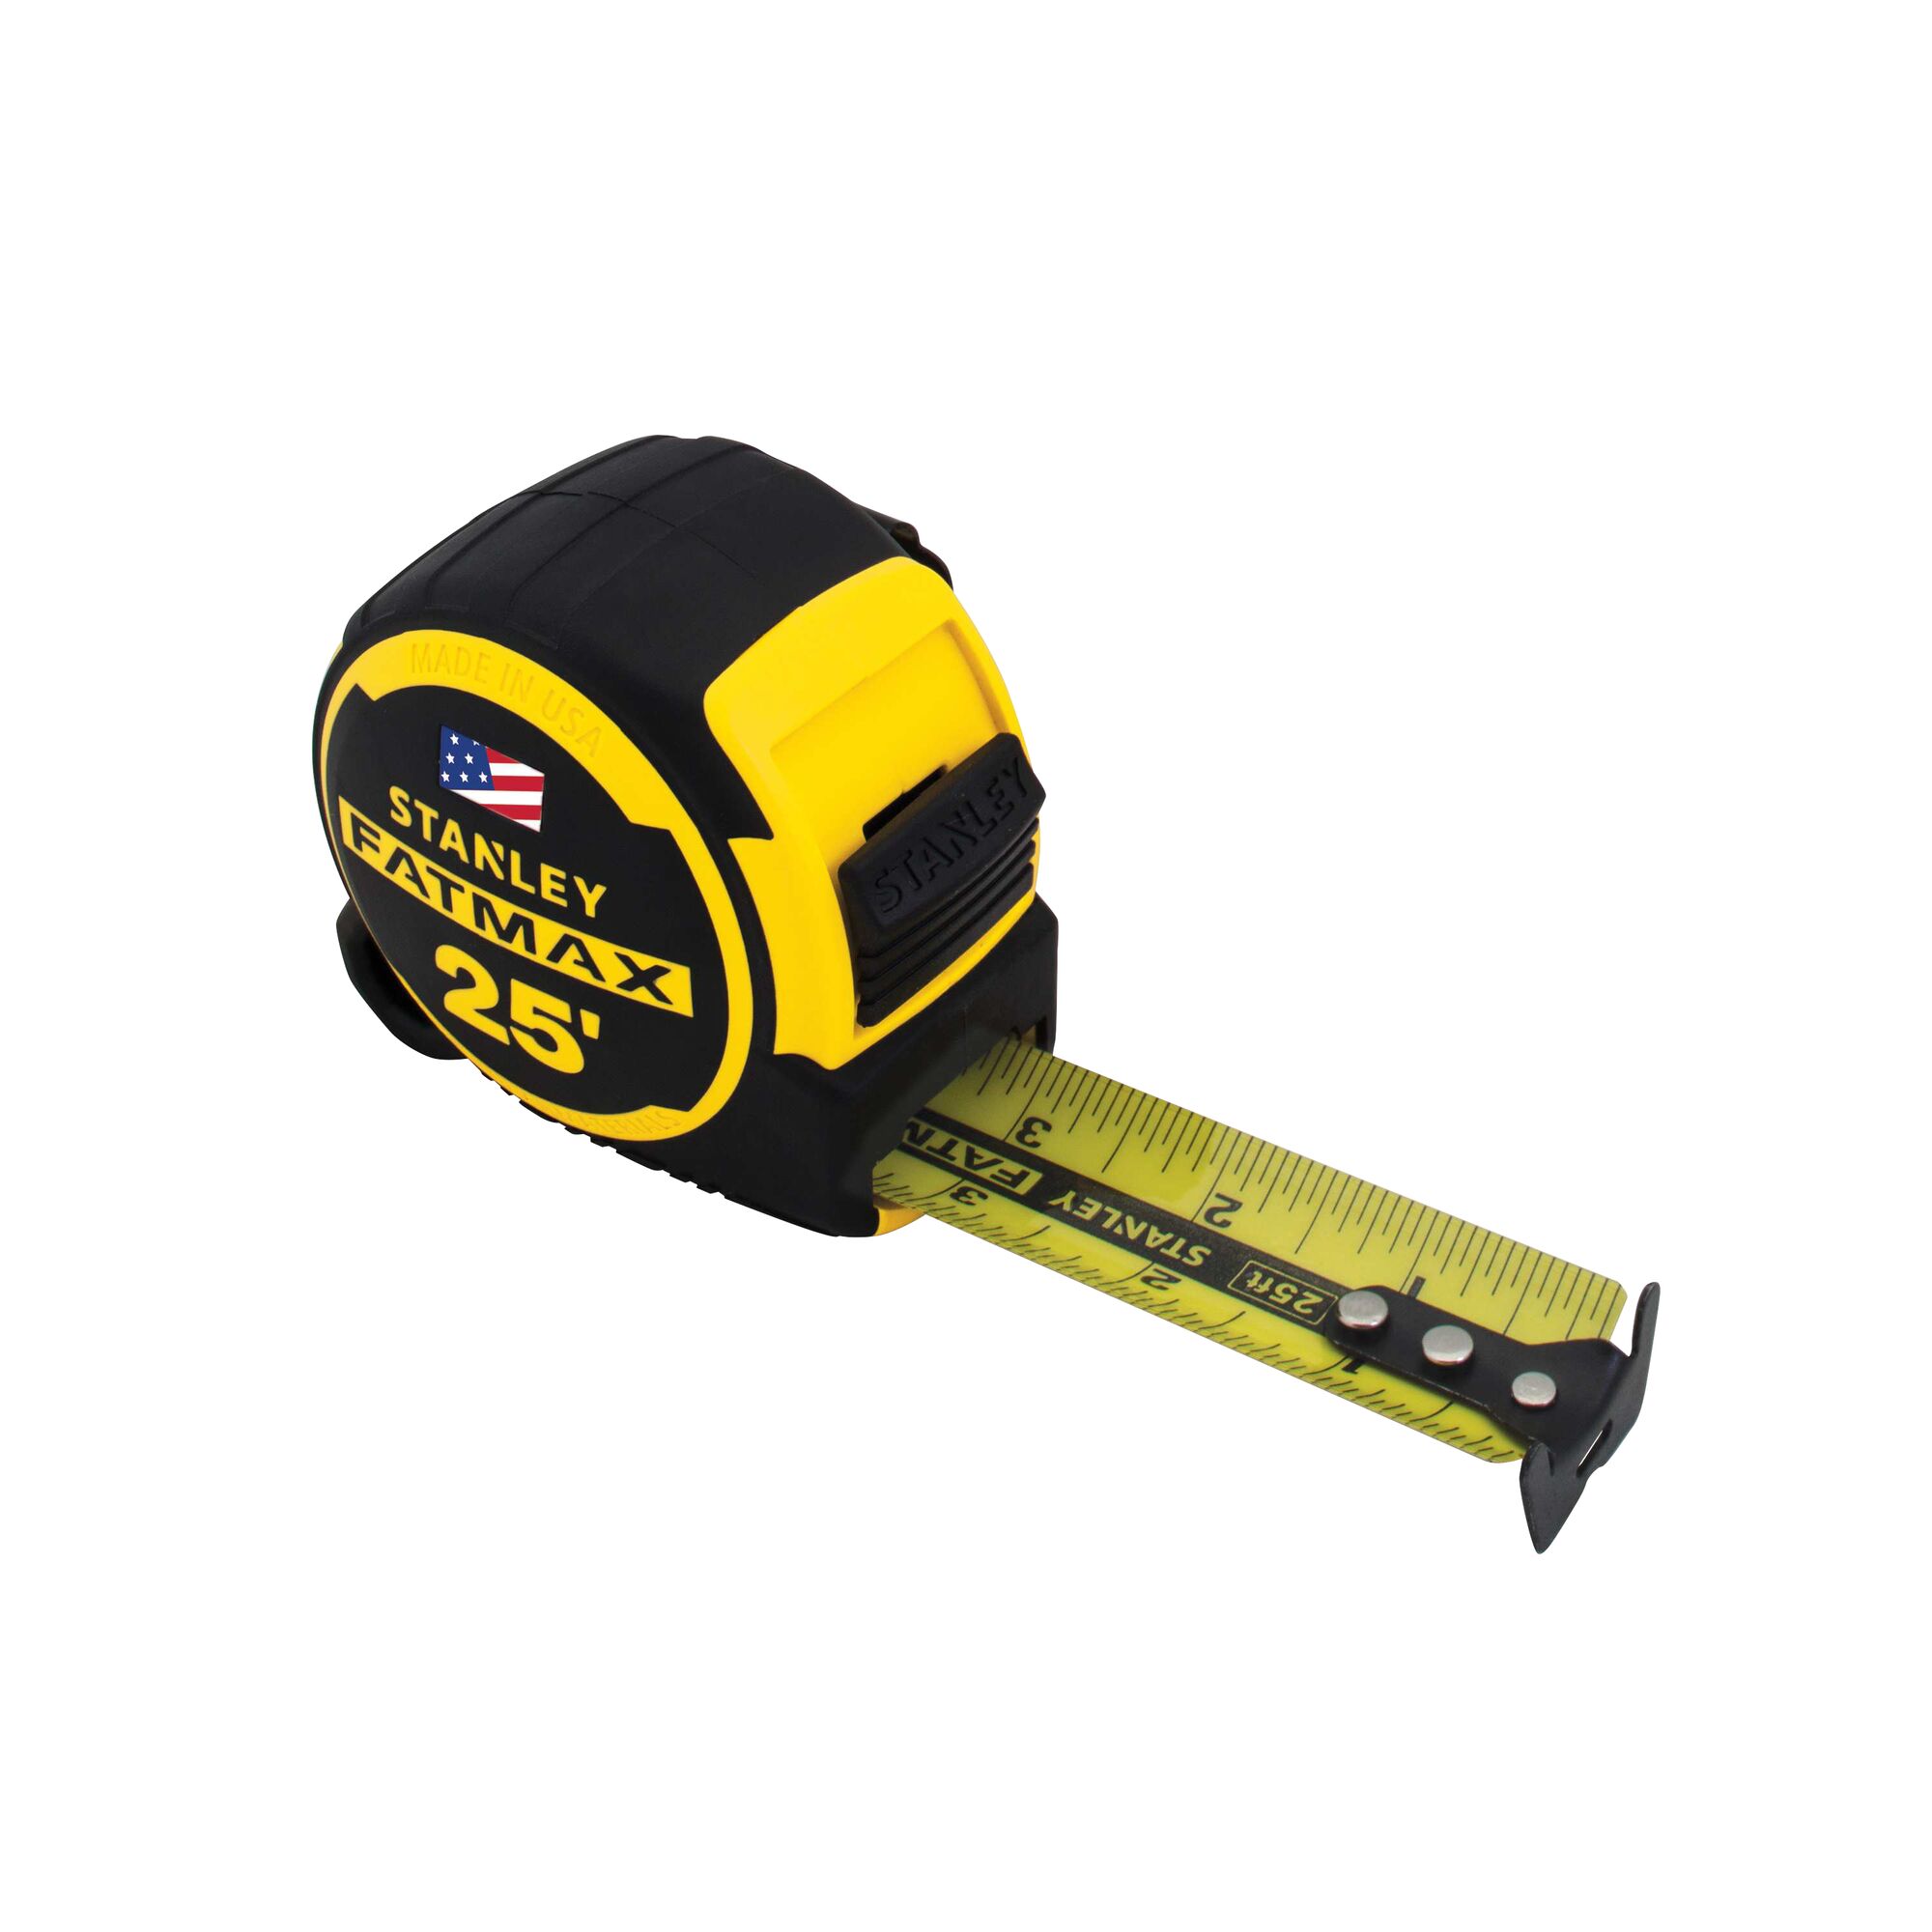 STANLEY FATMAX Magnetic Tape Measure 25 ft x 1-1/4 in Corrosion Resistant 